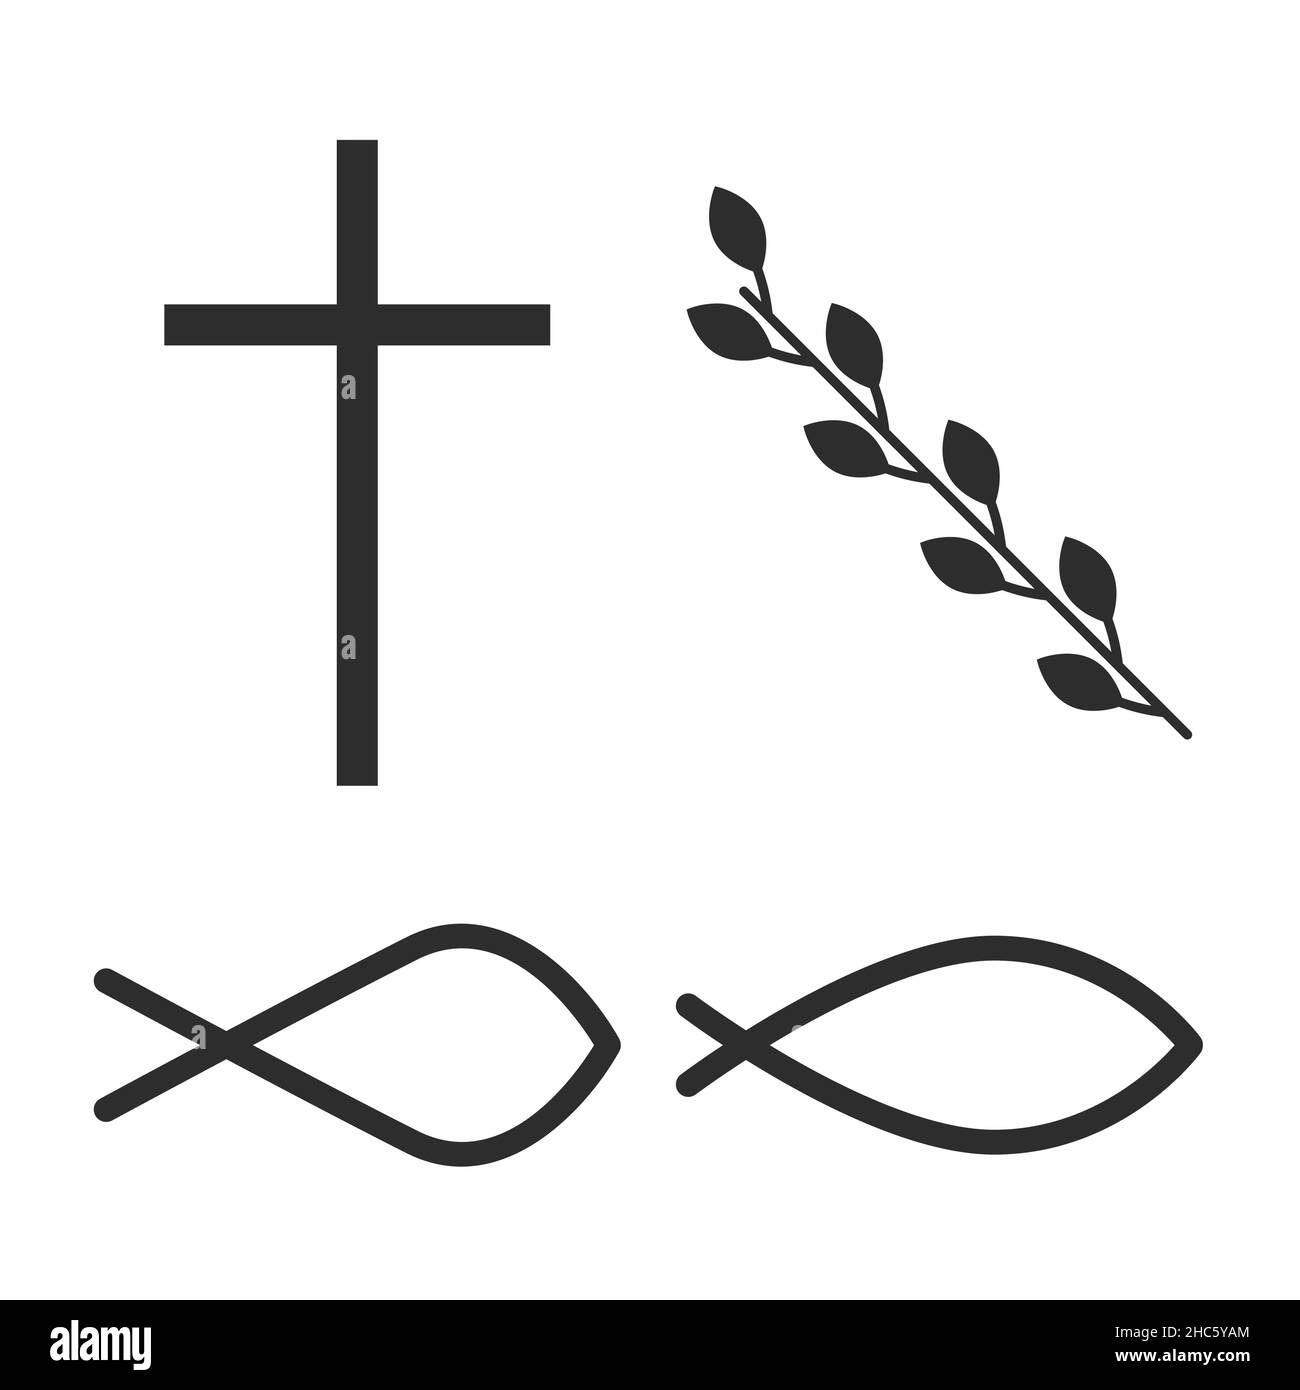 Cross, vine and fish. Symbols of Jesus Christ. Flat isolated Christian vector illustration, biblical background. Stock Vector